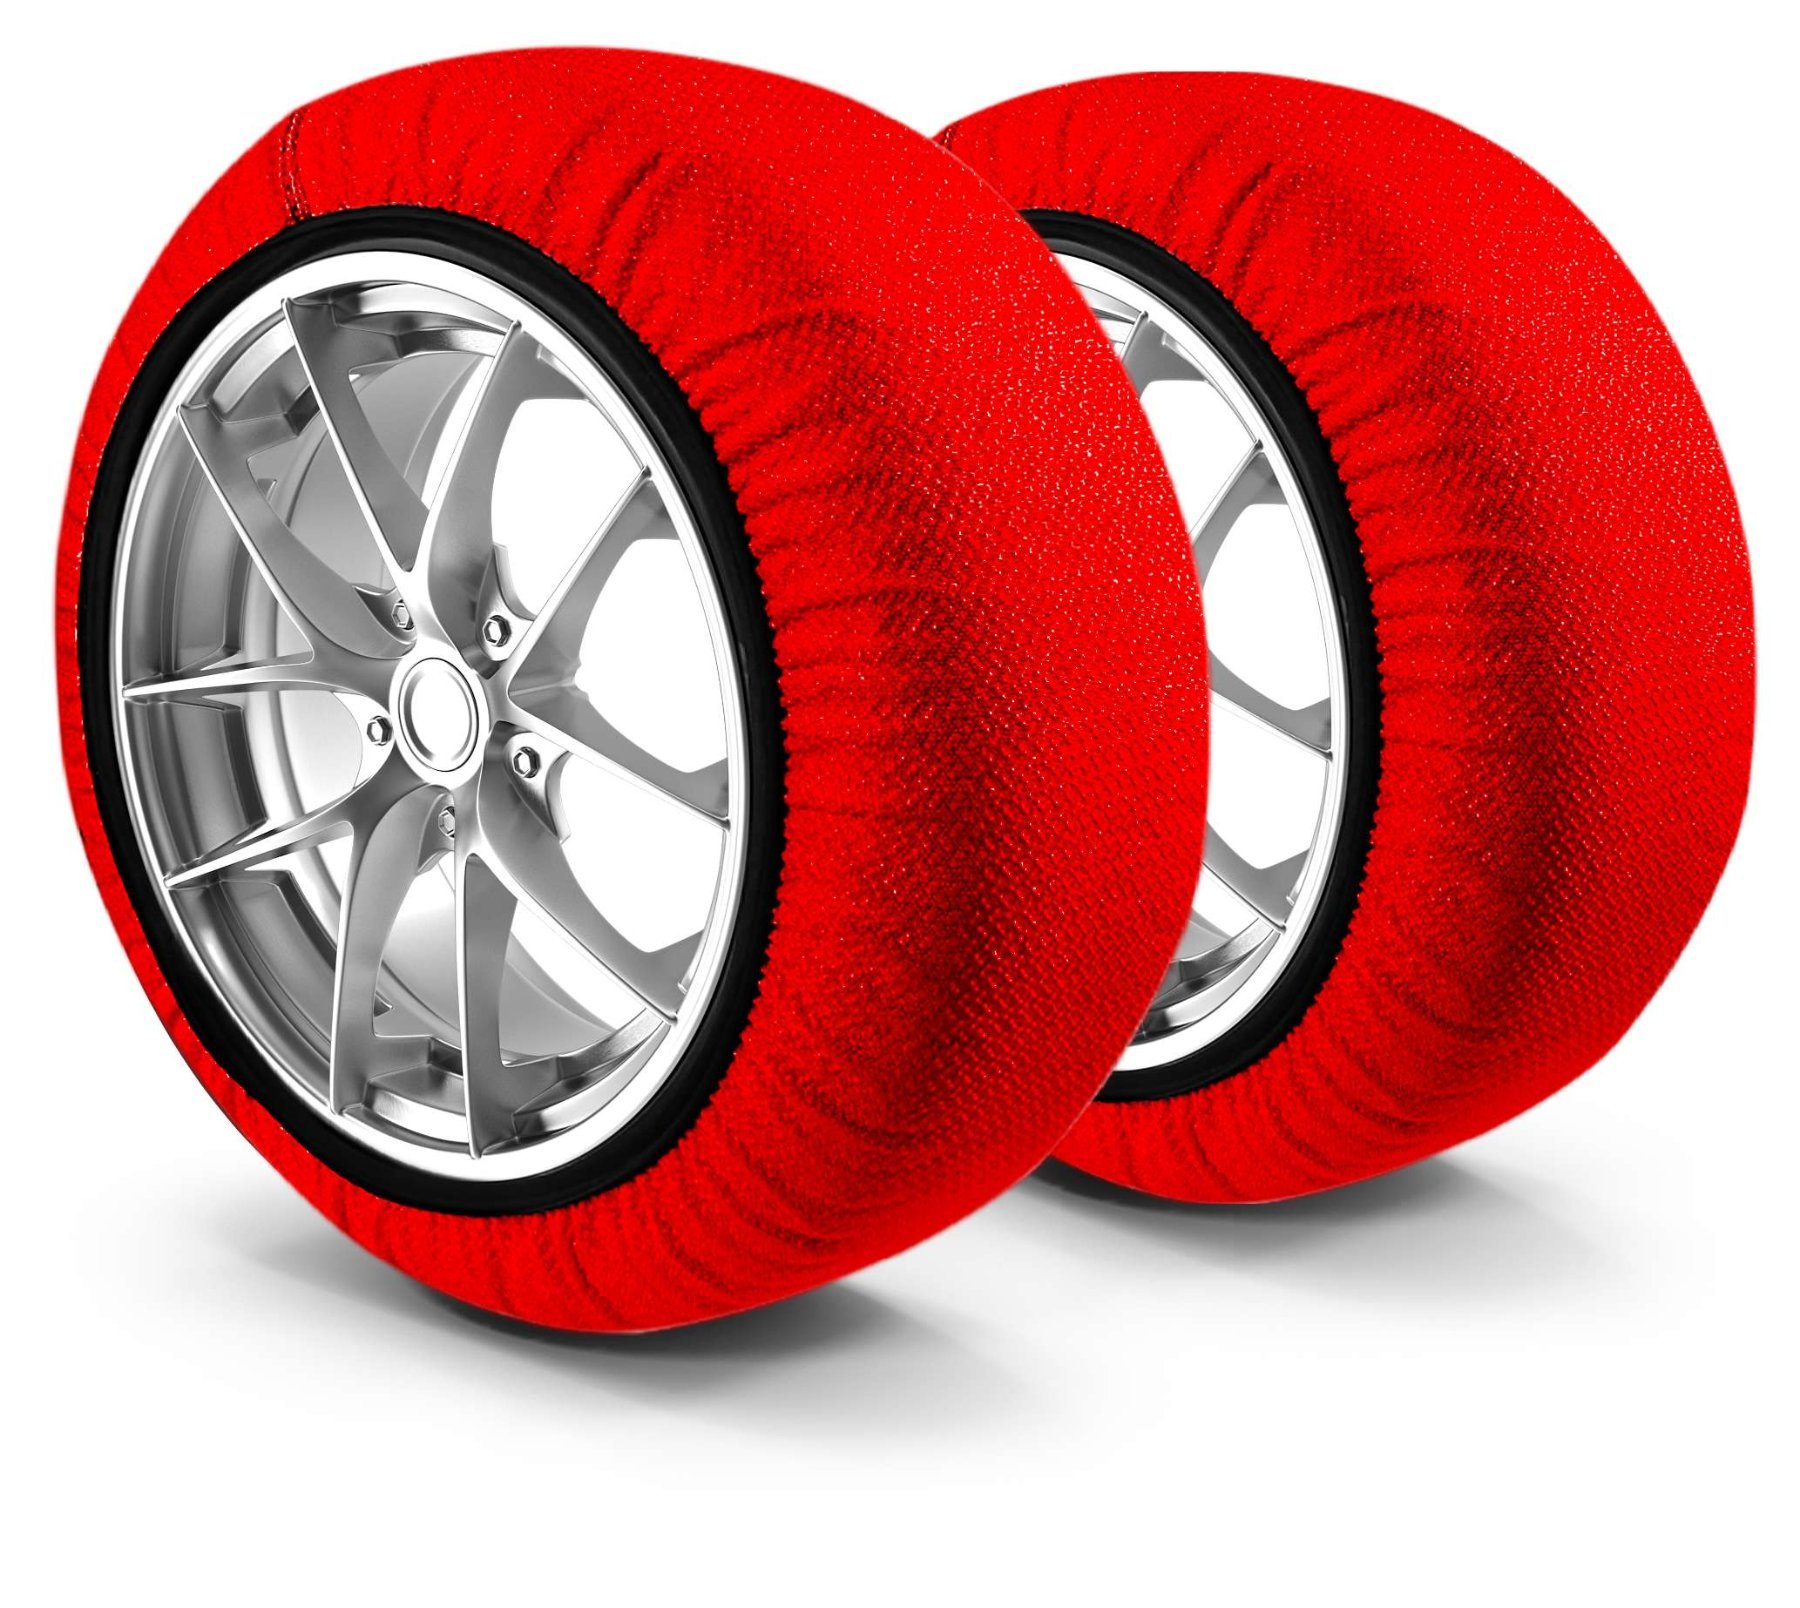 Basic Snow Chains Alternative Active XL, Textile Snow Chains, Snow Socks Set of 2 red